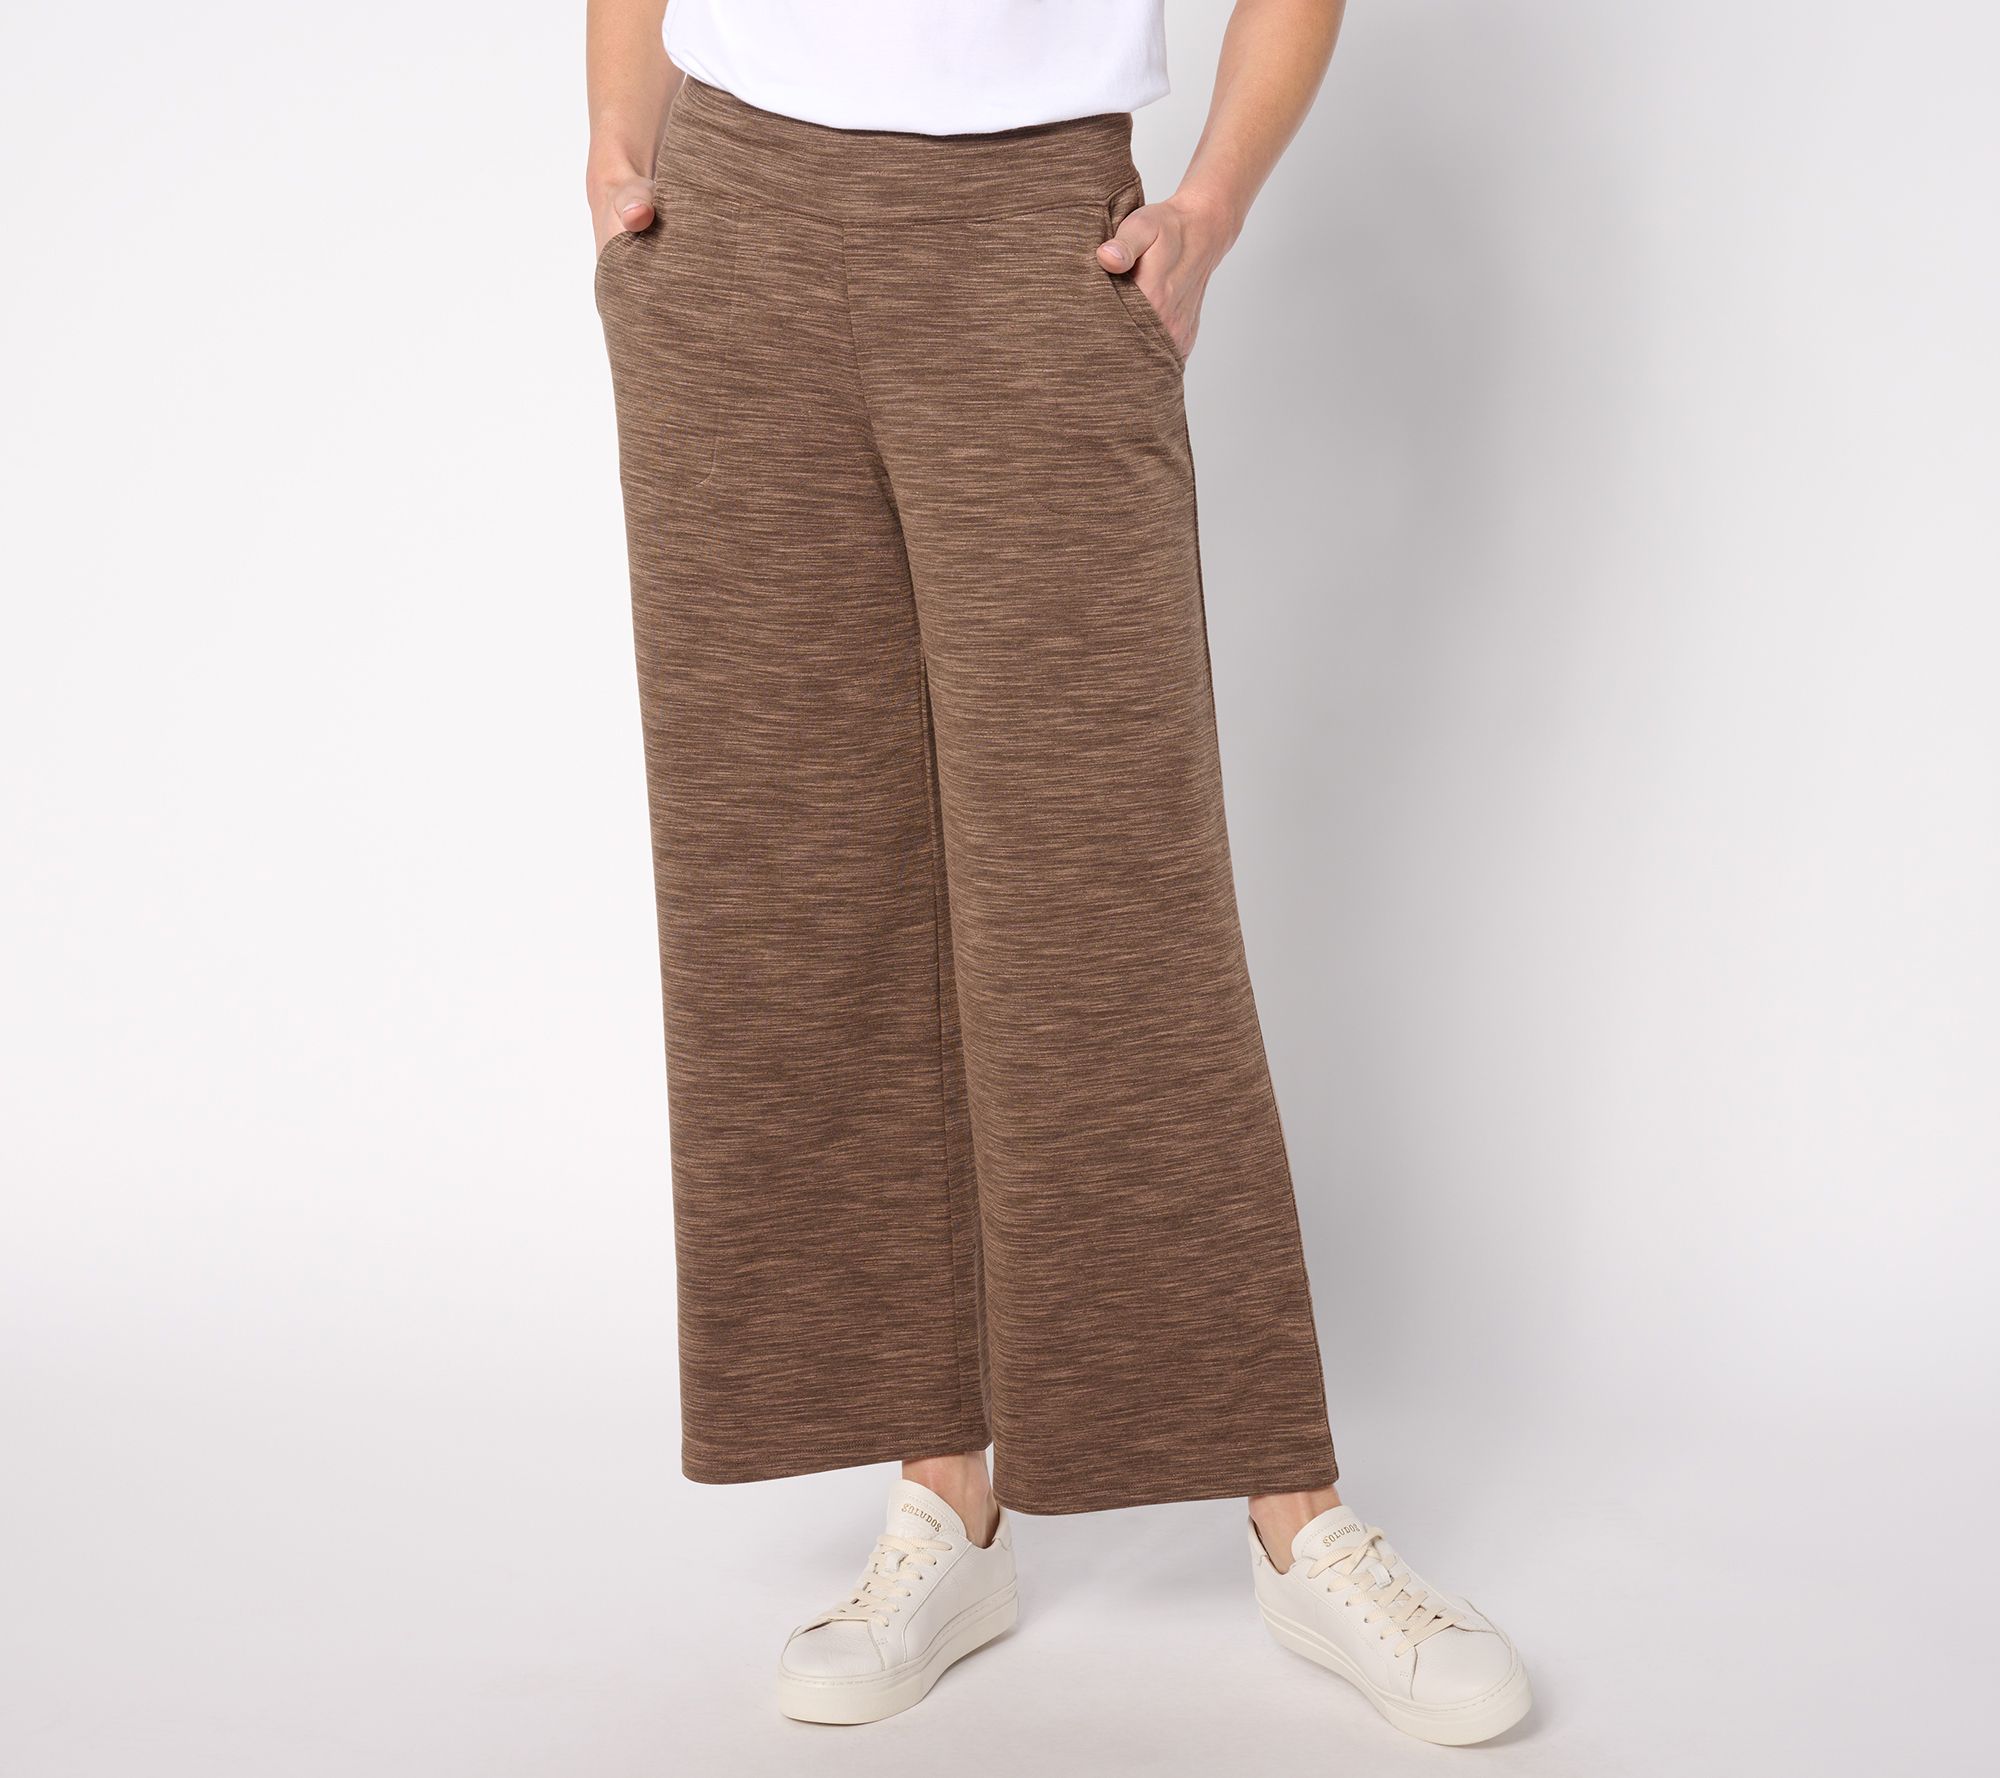 Wide Band Elastic Waist Pull On Ankle Pant - Chocolate